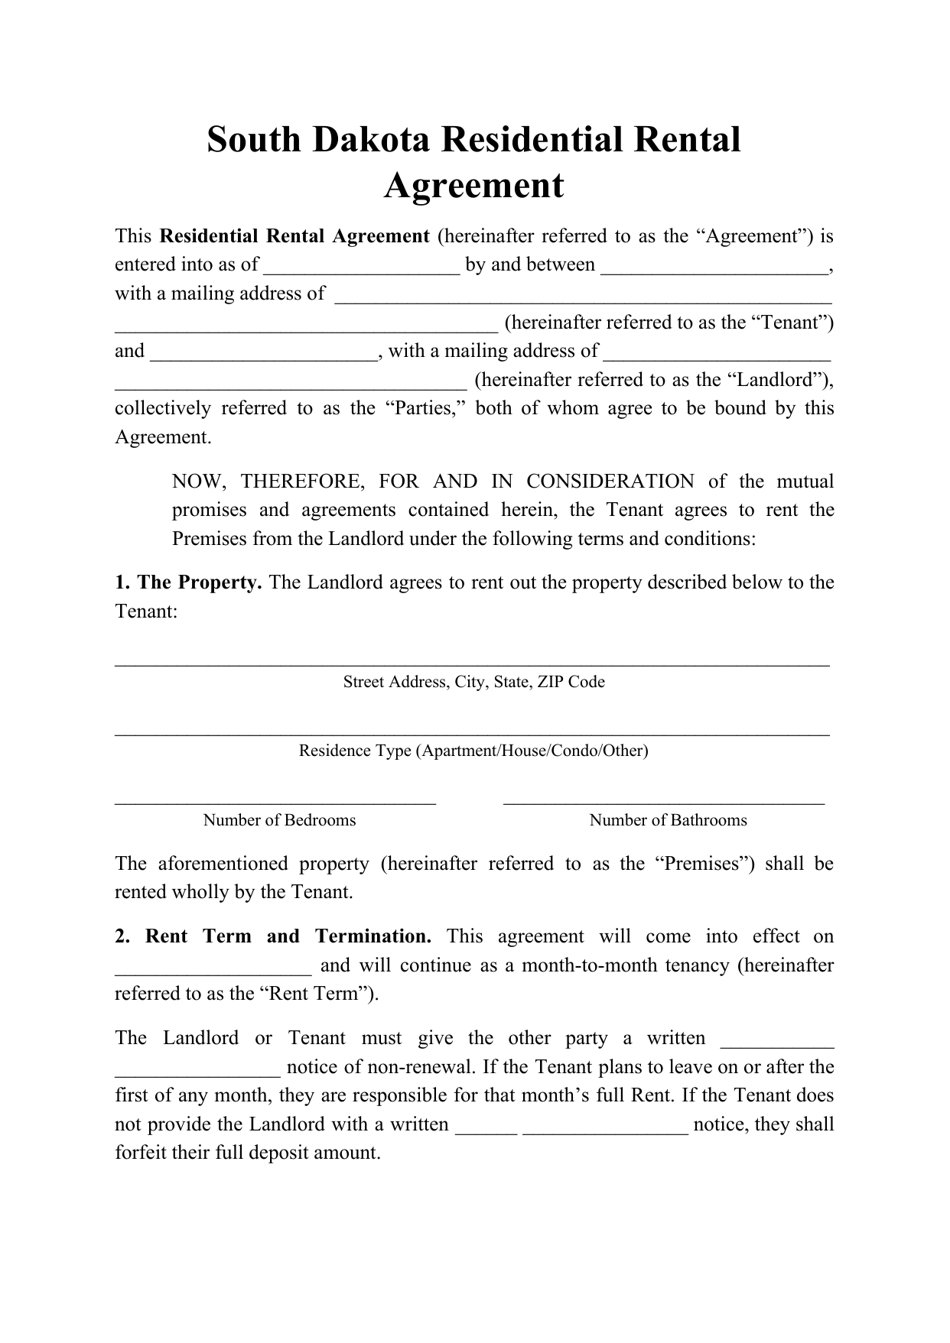 Residential Rental Agreement Template - South Dakota, Page 1